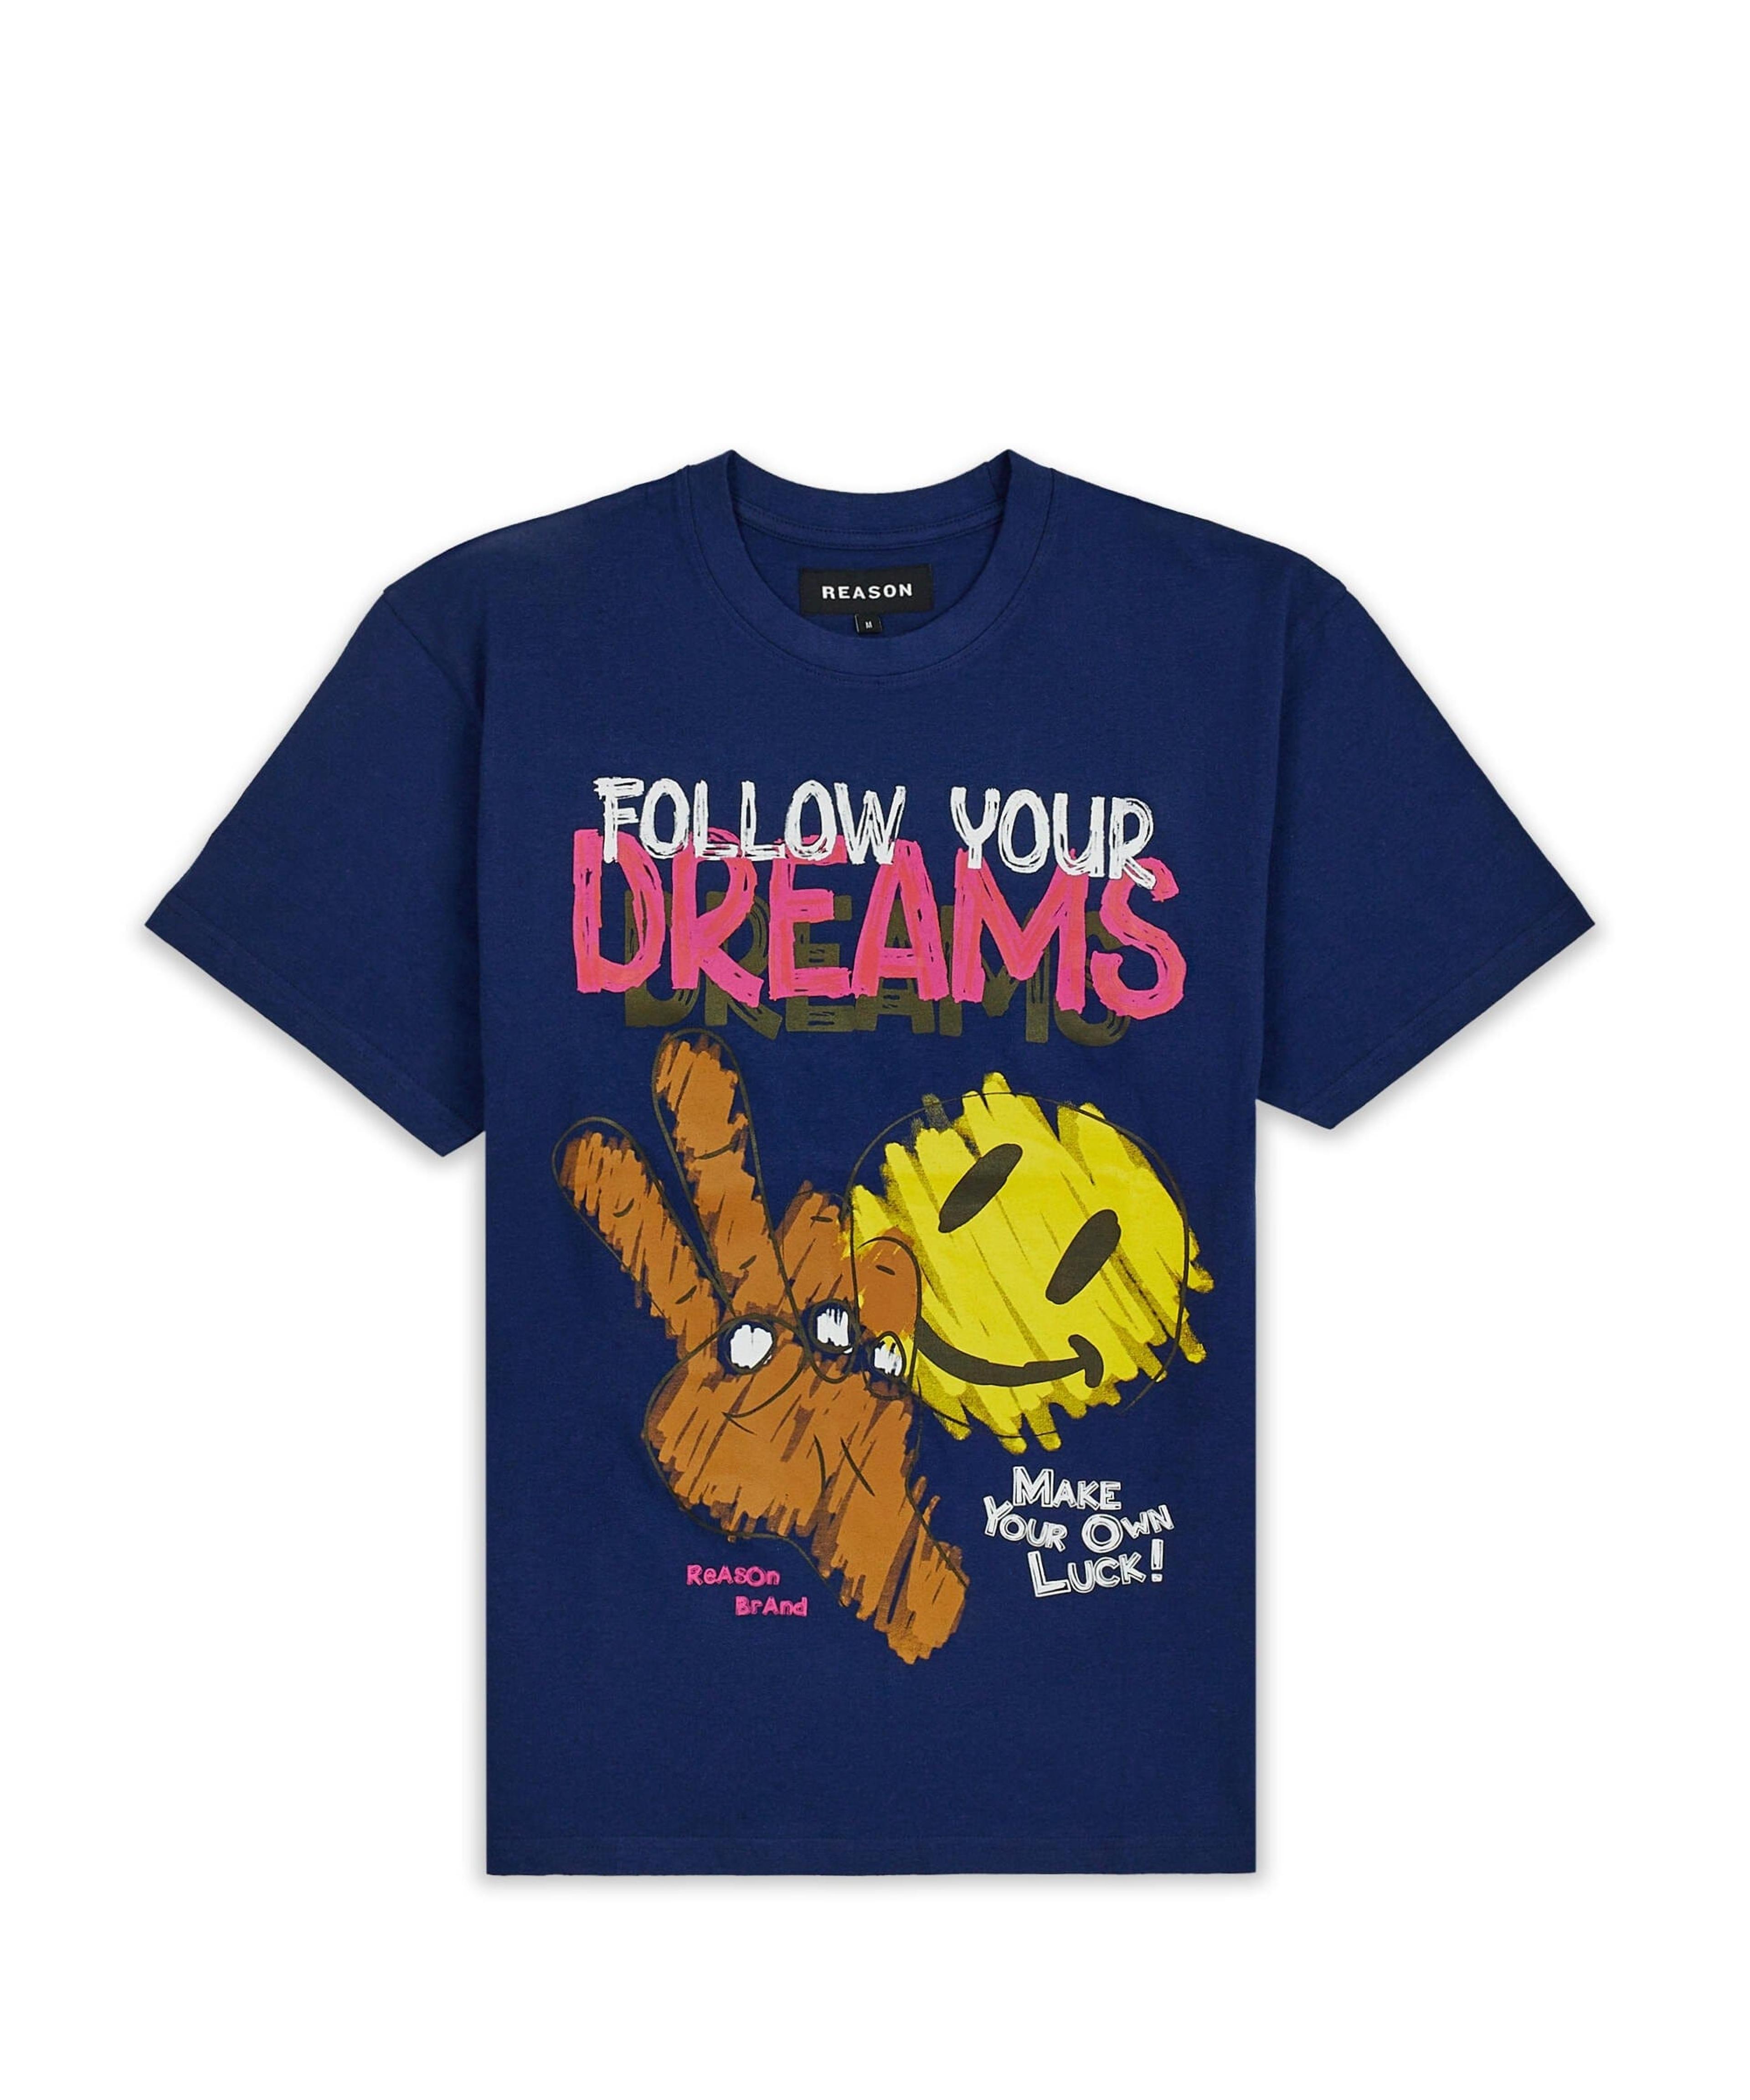 Alternate View 4 of Follow Your Dreams Short Sleeve Tee - Navy